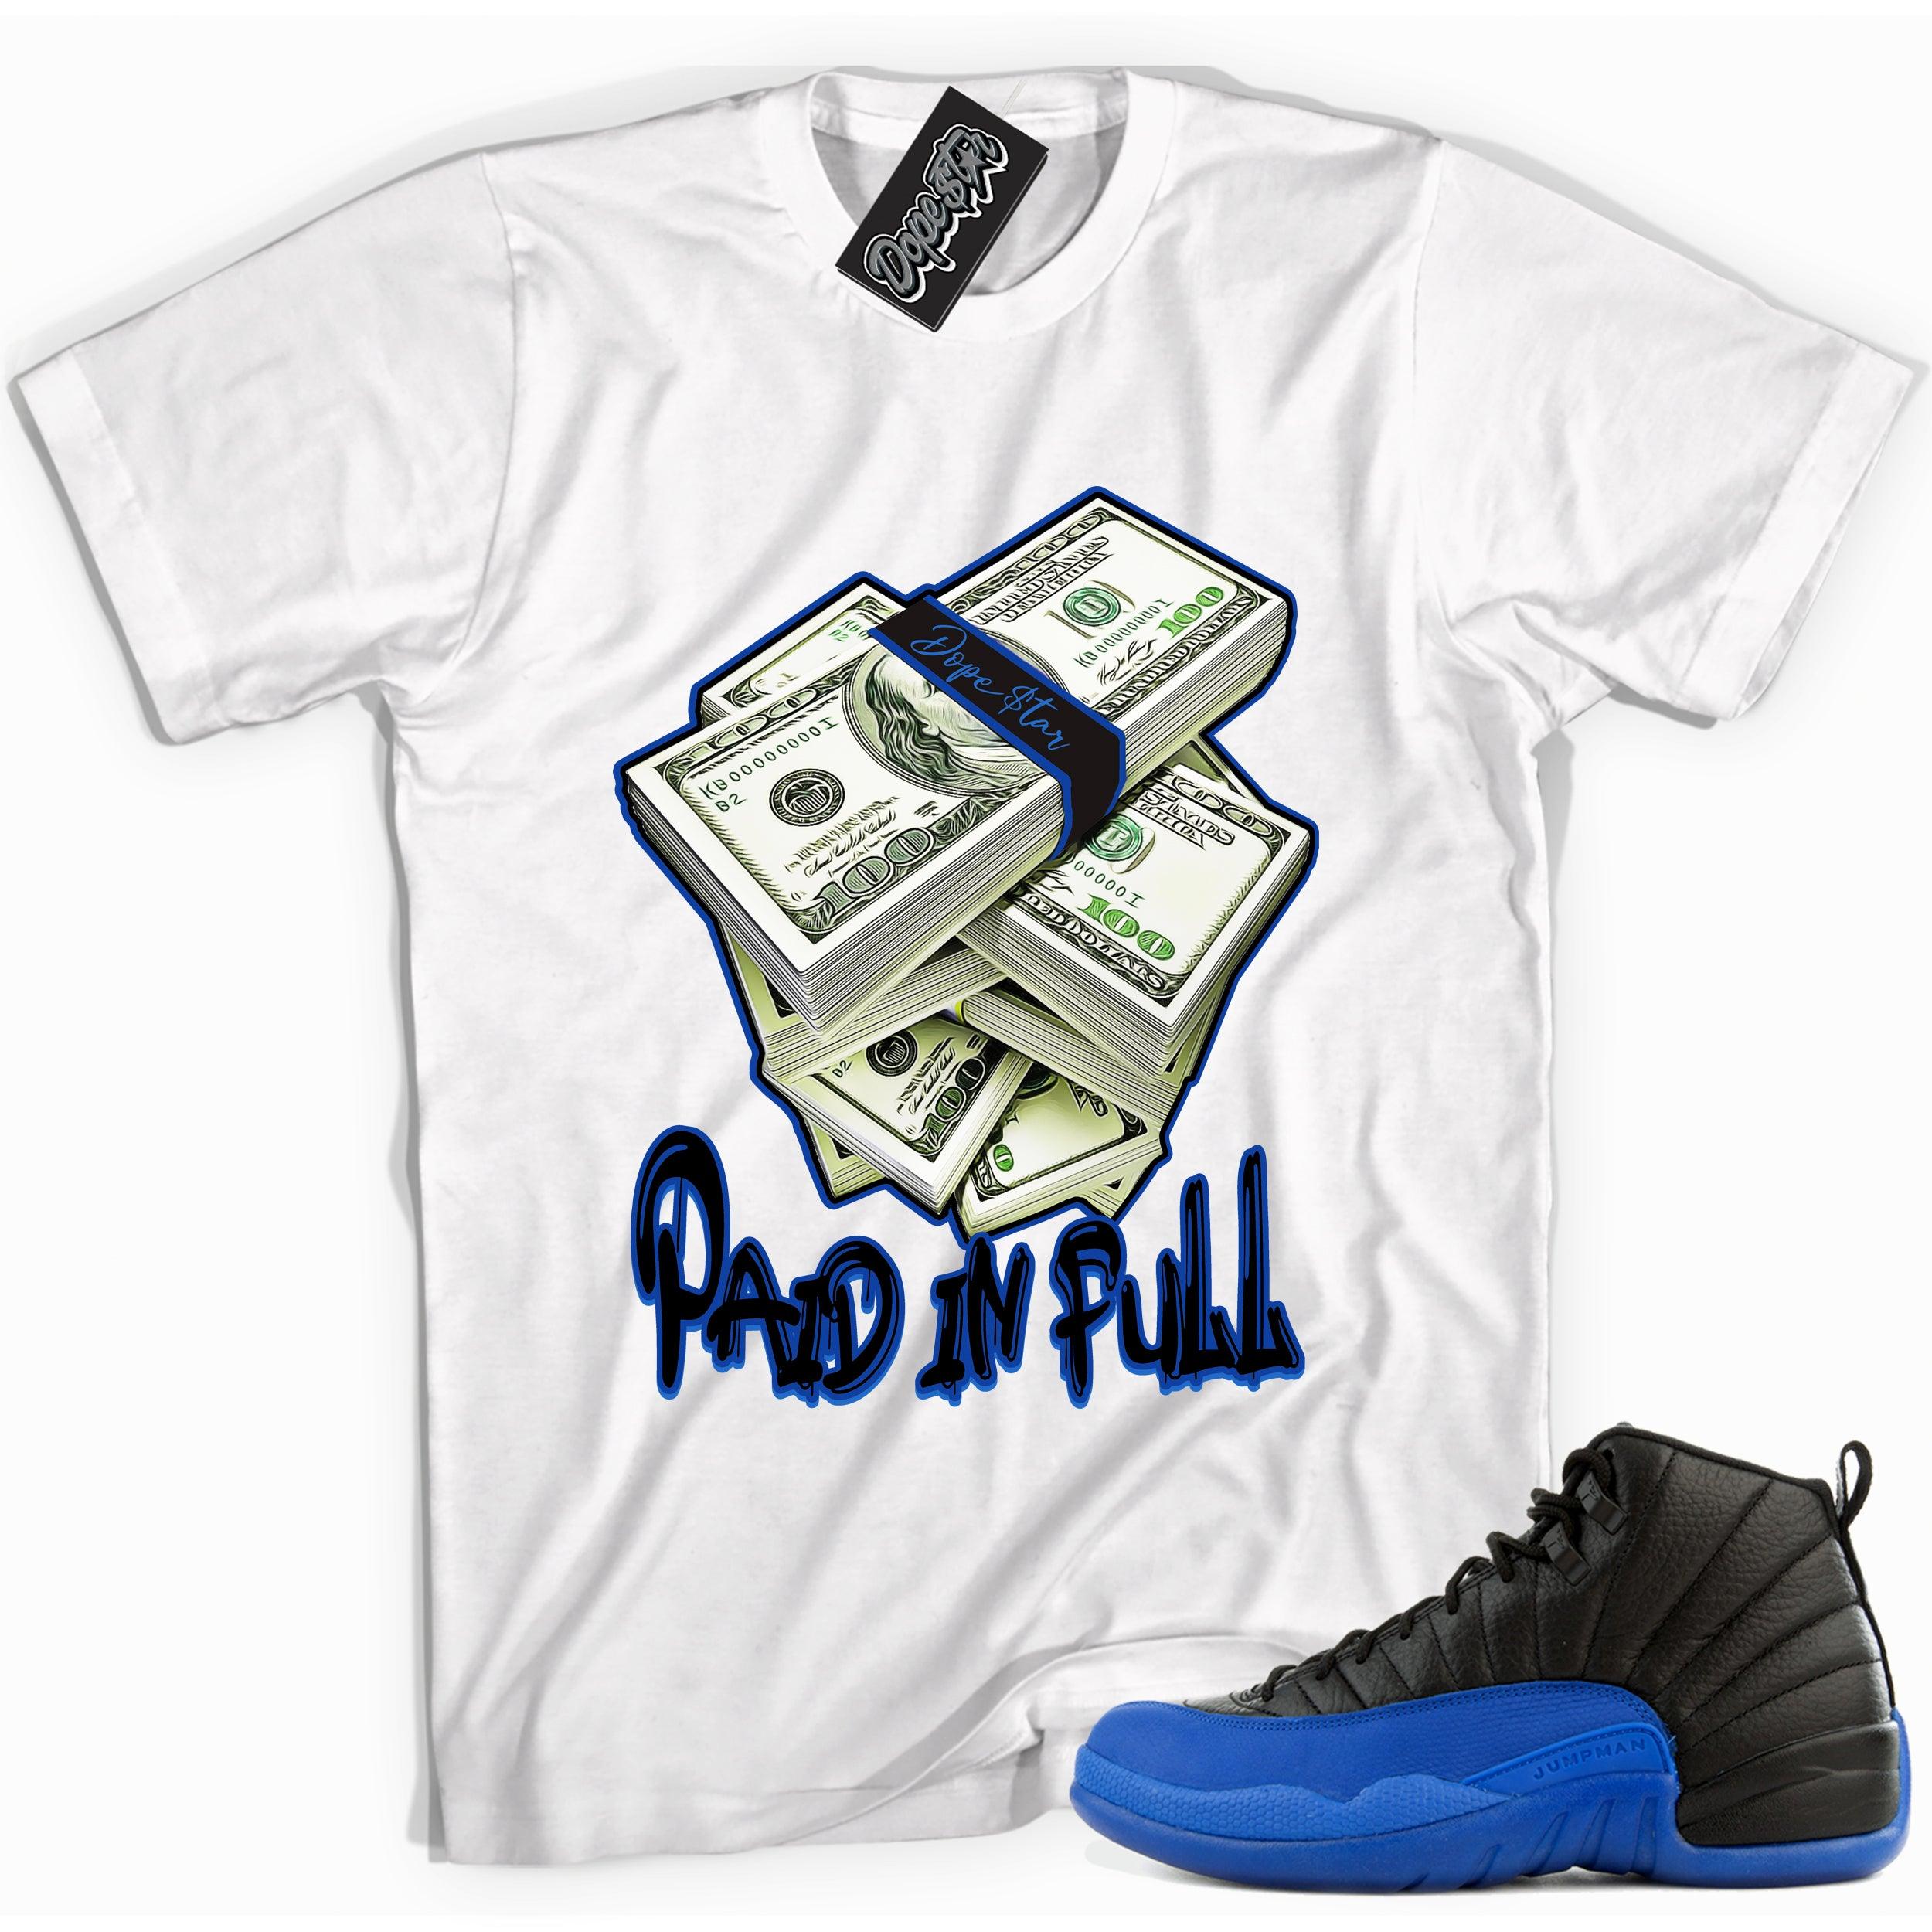 Cool white graphic tee with 'paid in full' print, that perfectly matches Air Jordan 12 Retro Black Game Royal sneakers.